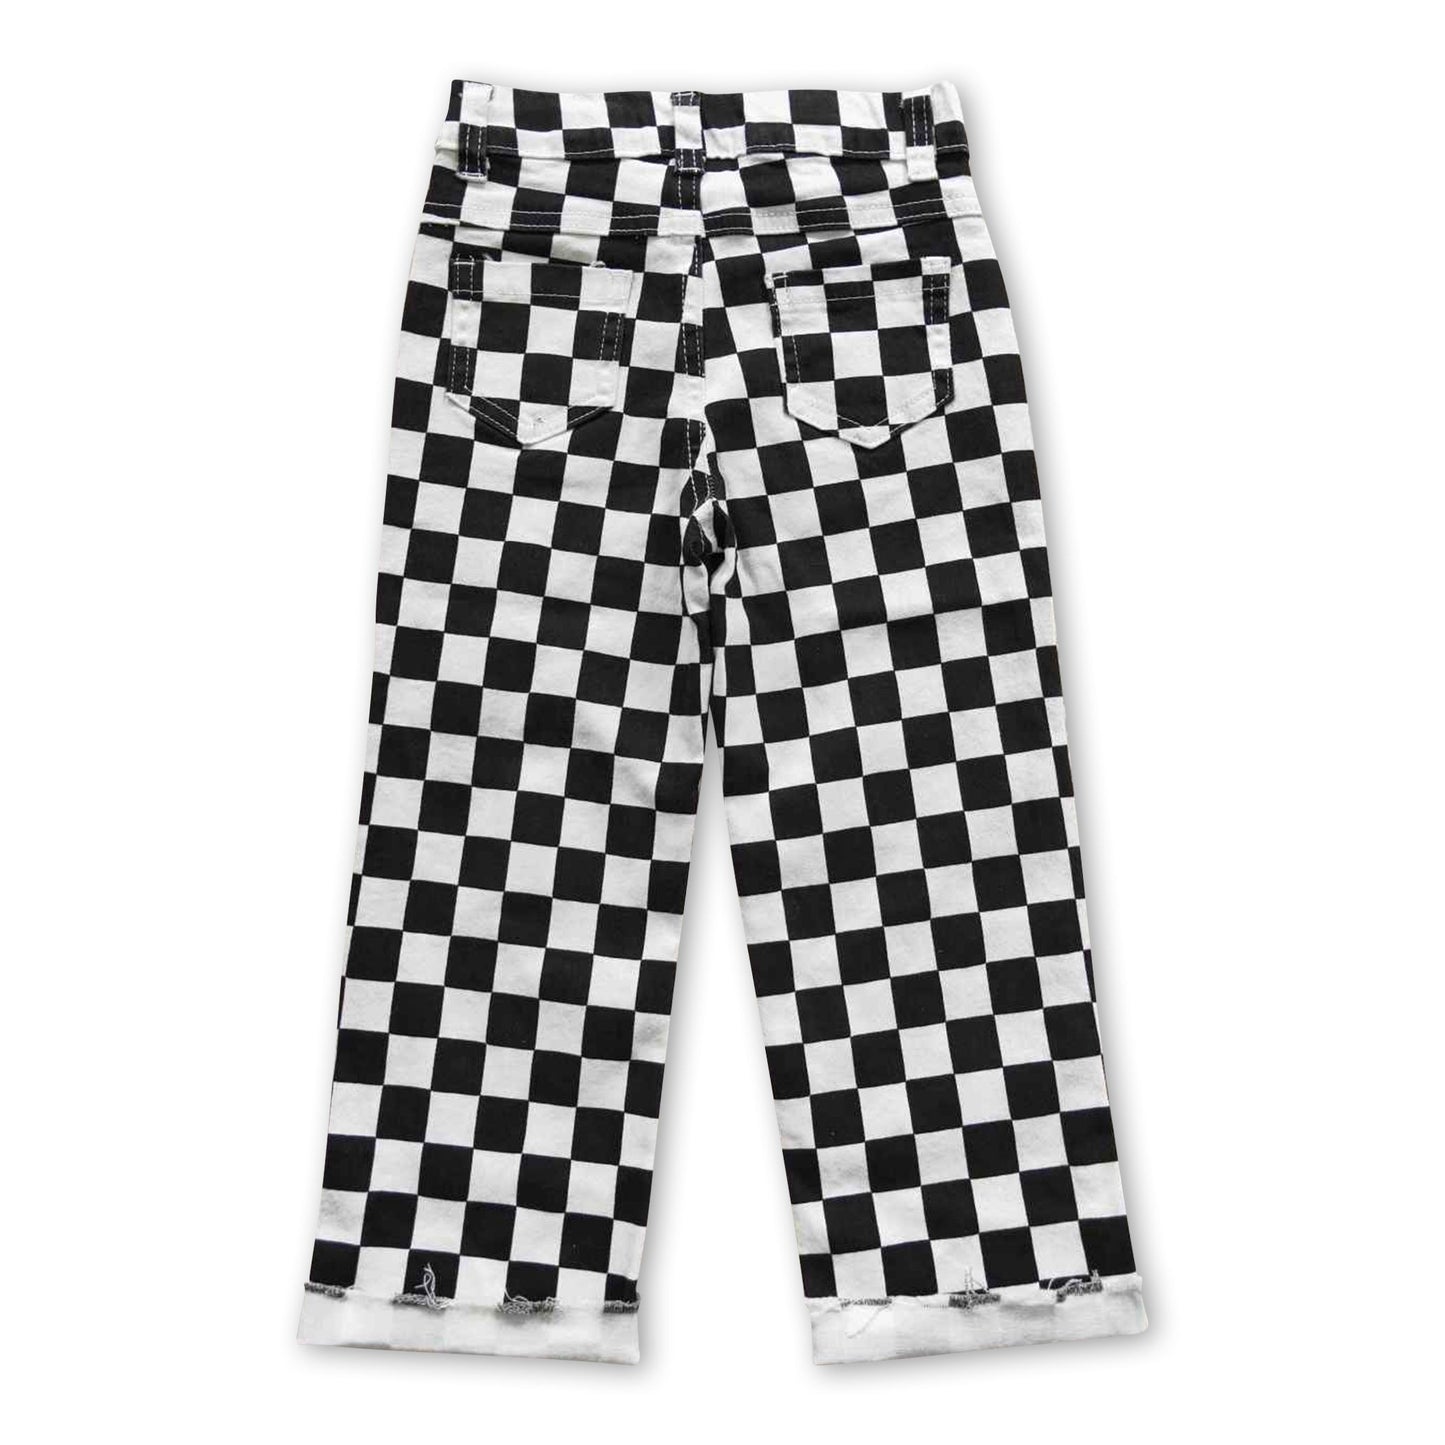 Black checked hole baby boy jeans